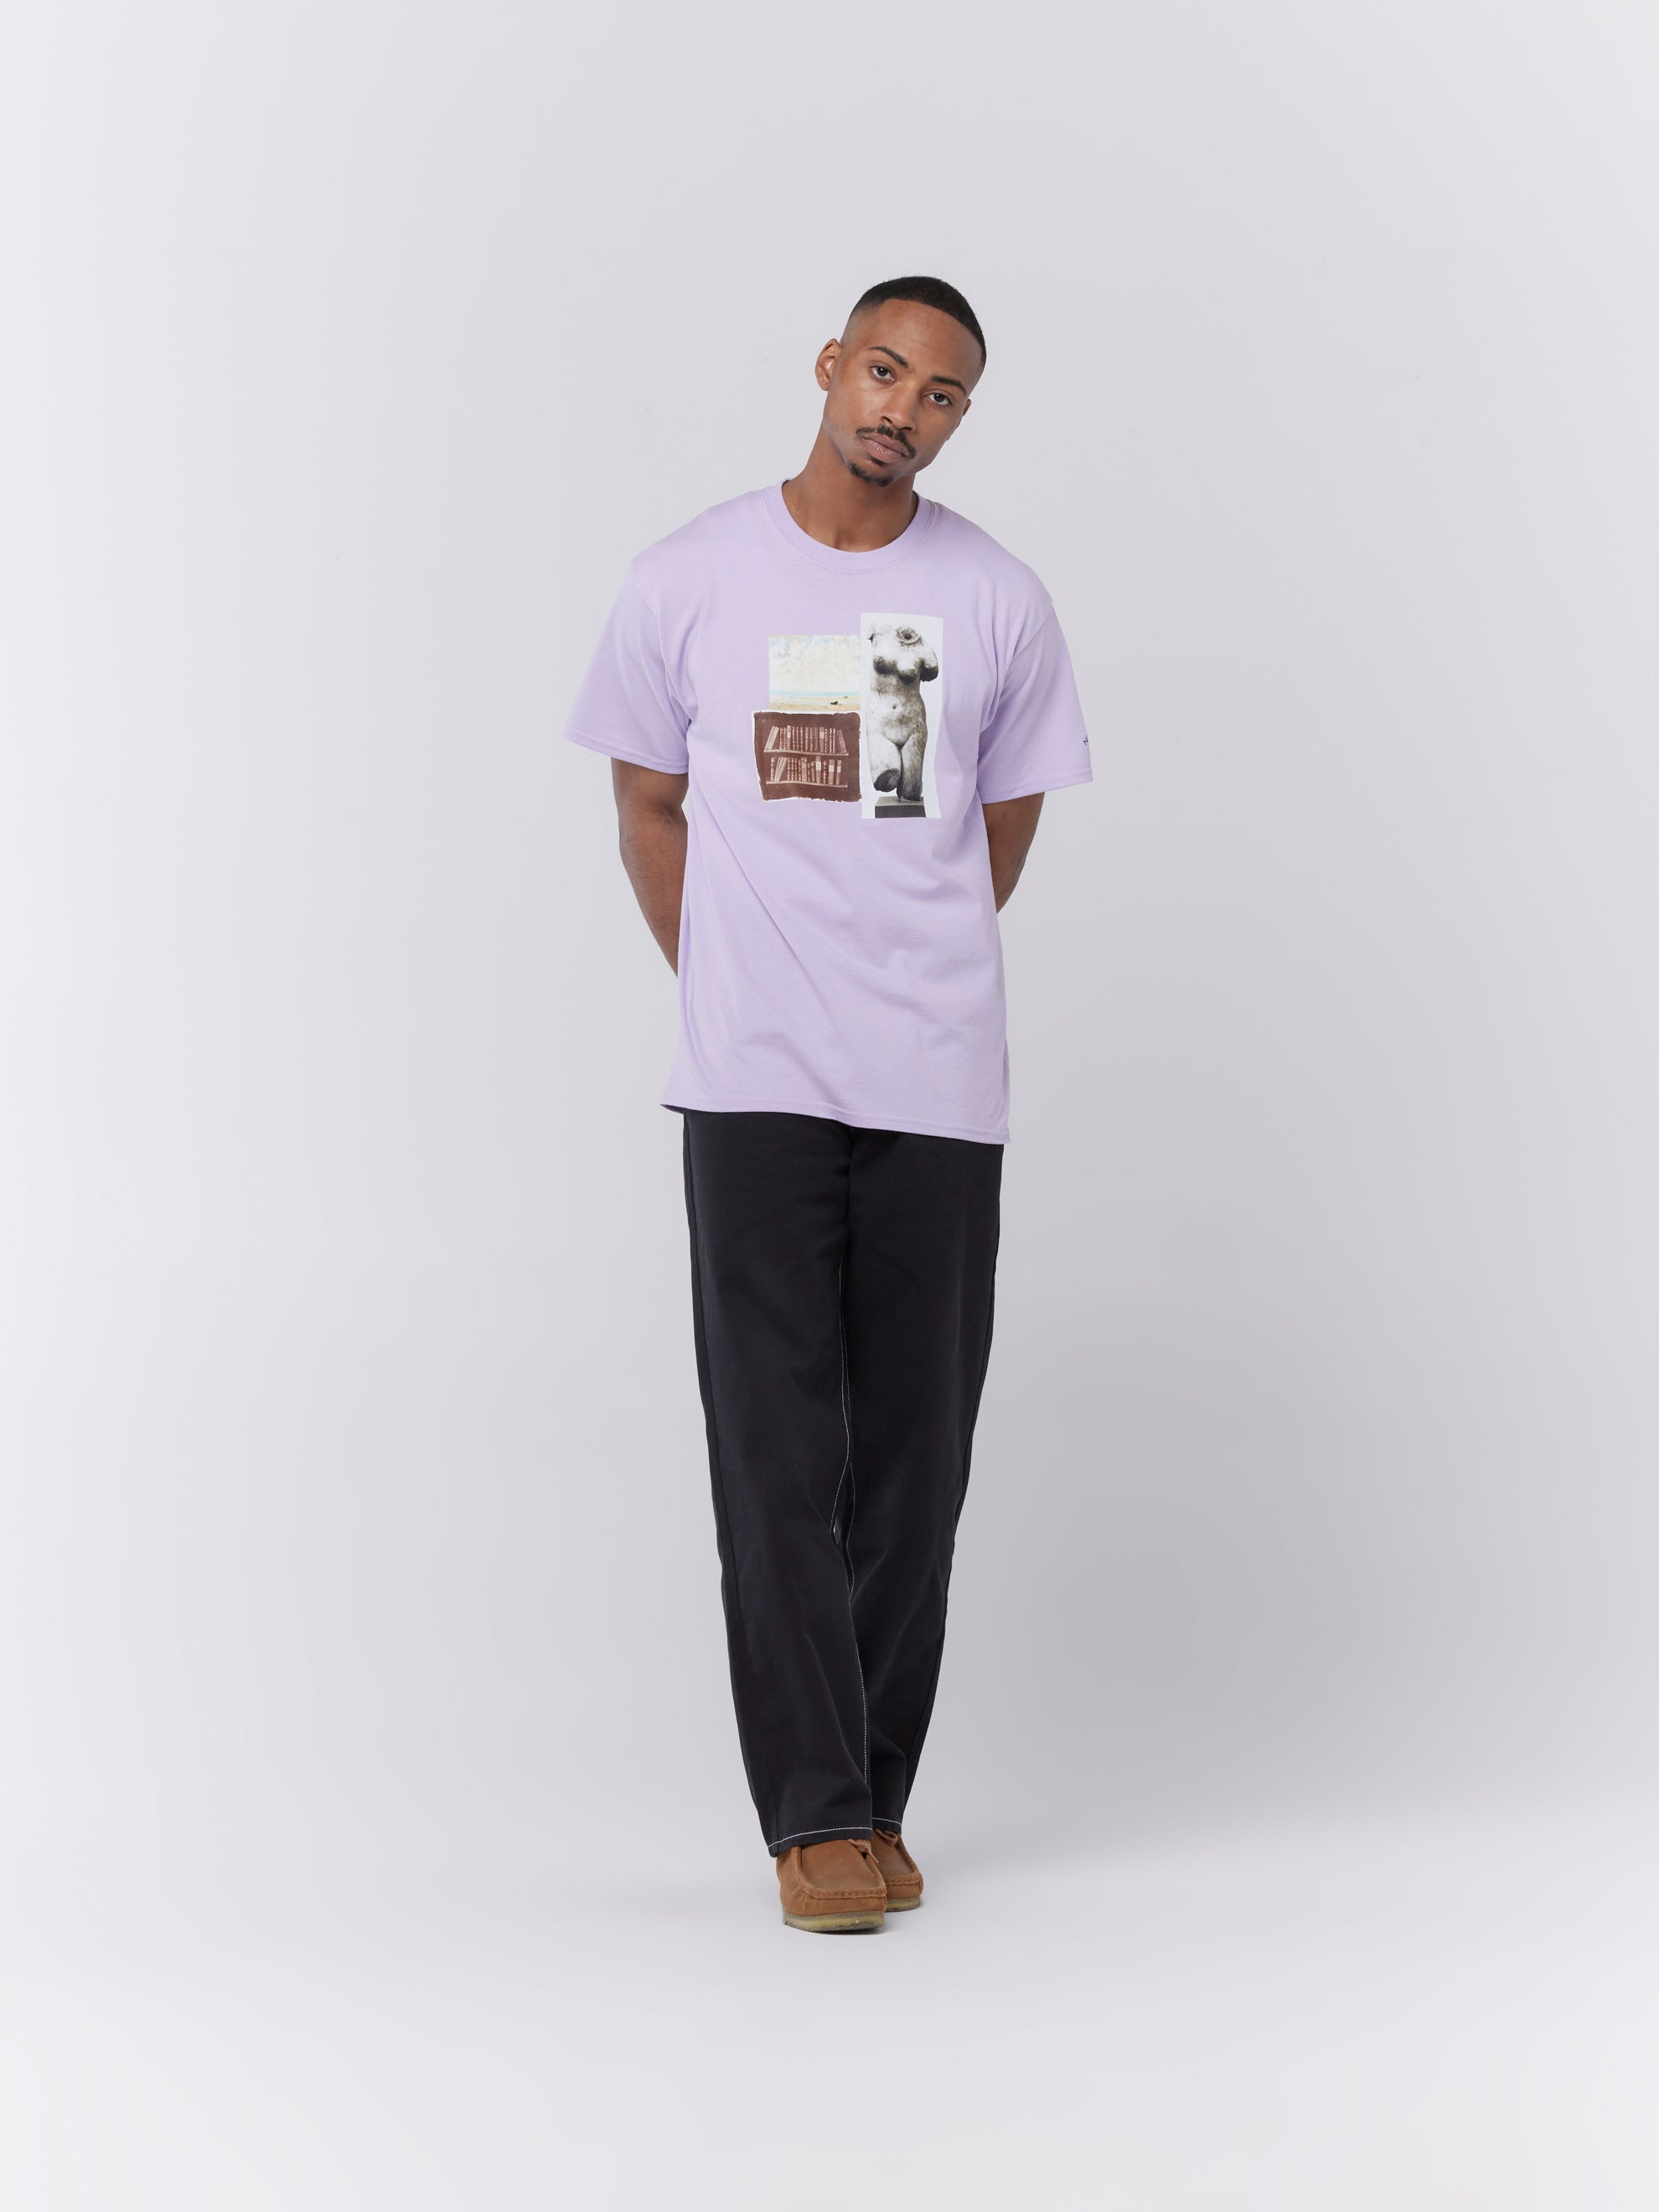 Collection Tee (Lavender)